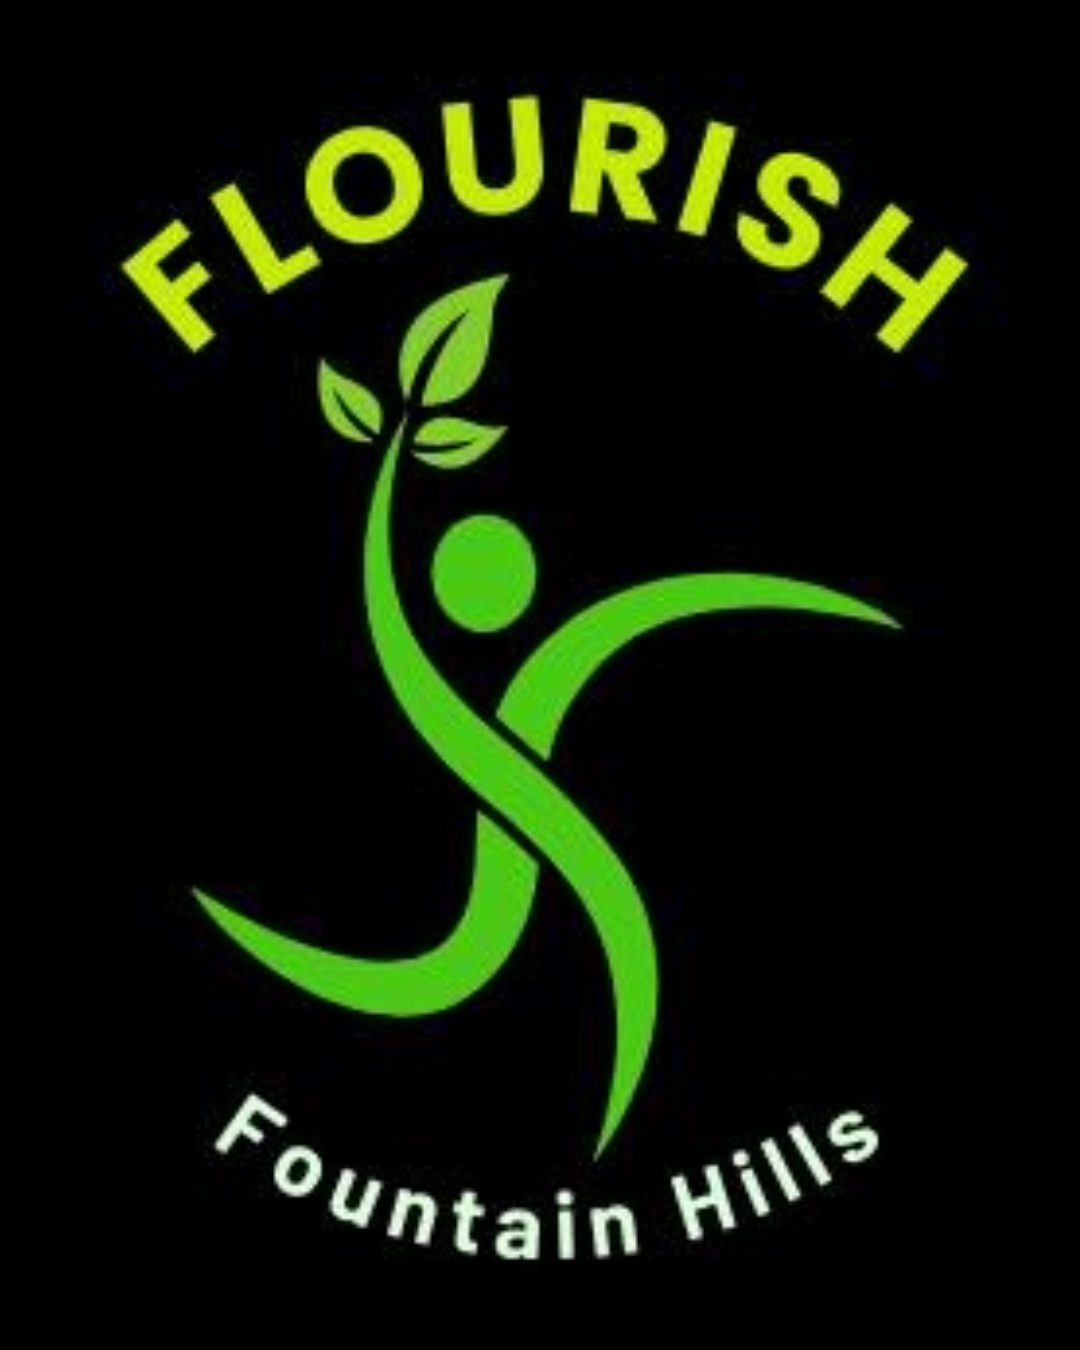 Welcome to Flourish FH